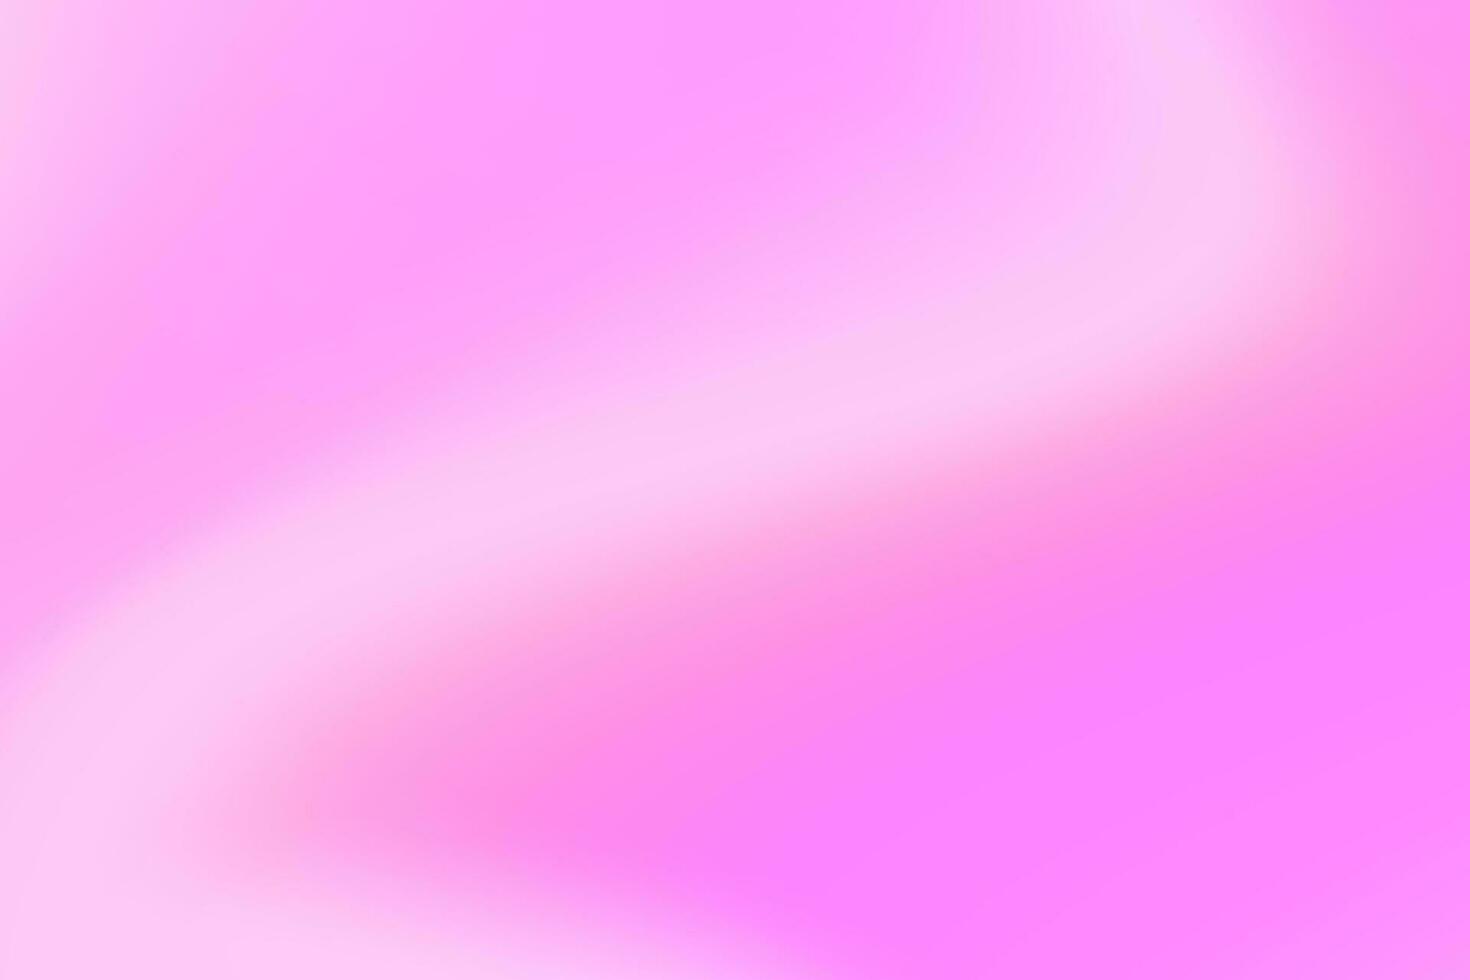 Blossom Pink and Magenta Gradient Abstract background.  Beautiful Pink gradation backdrop. No text. Vector Illustration. EPS 10.